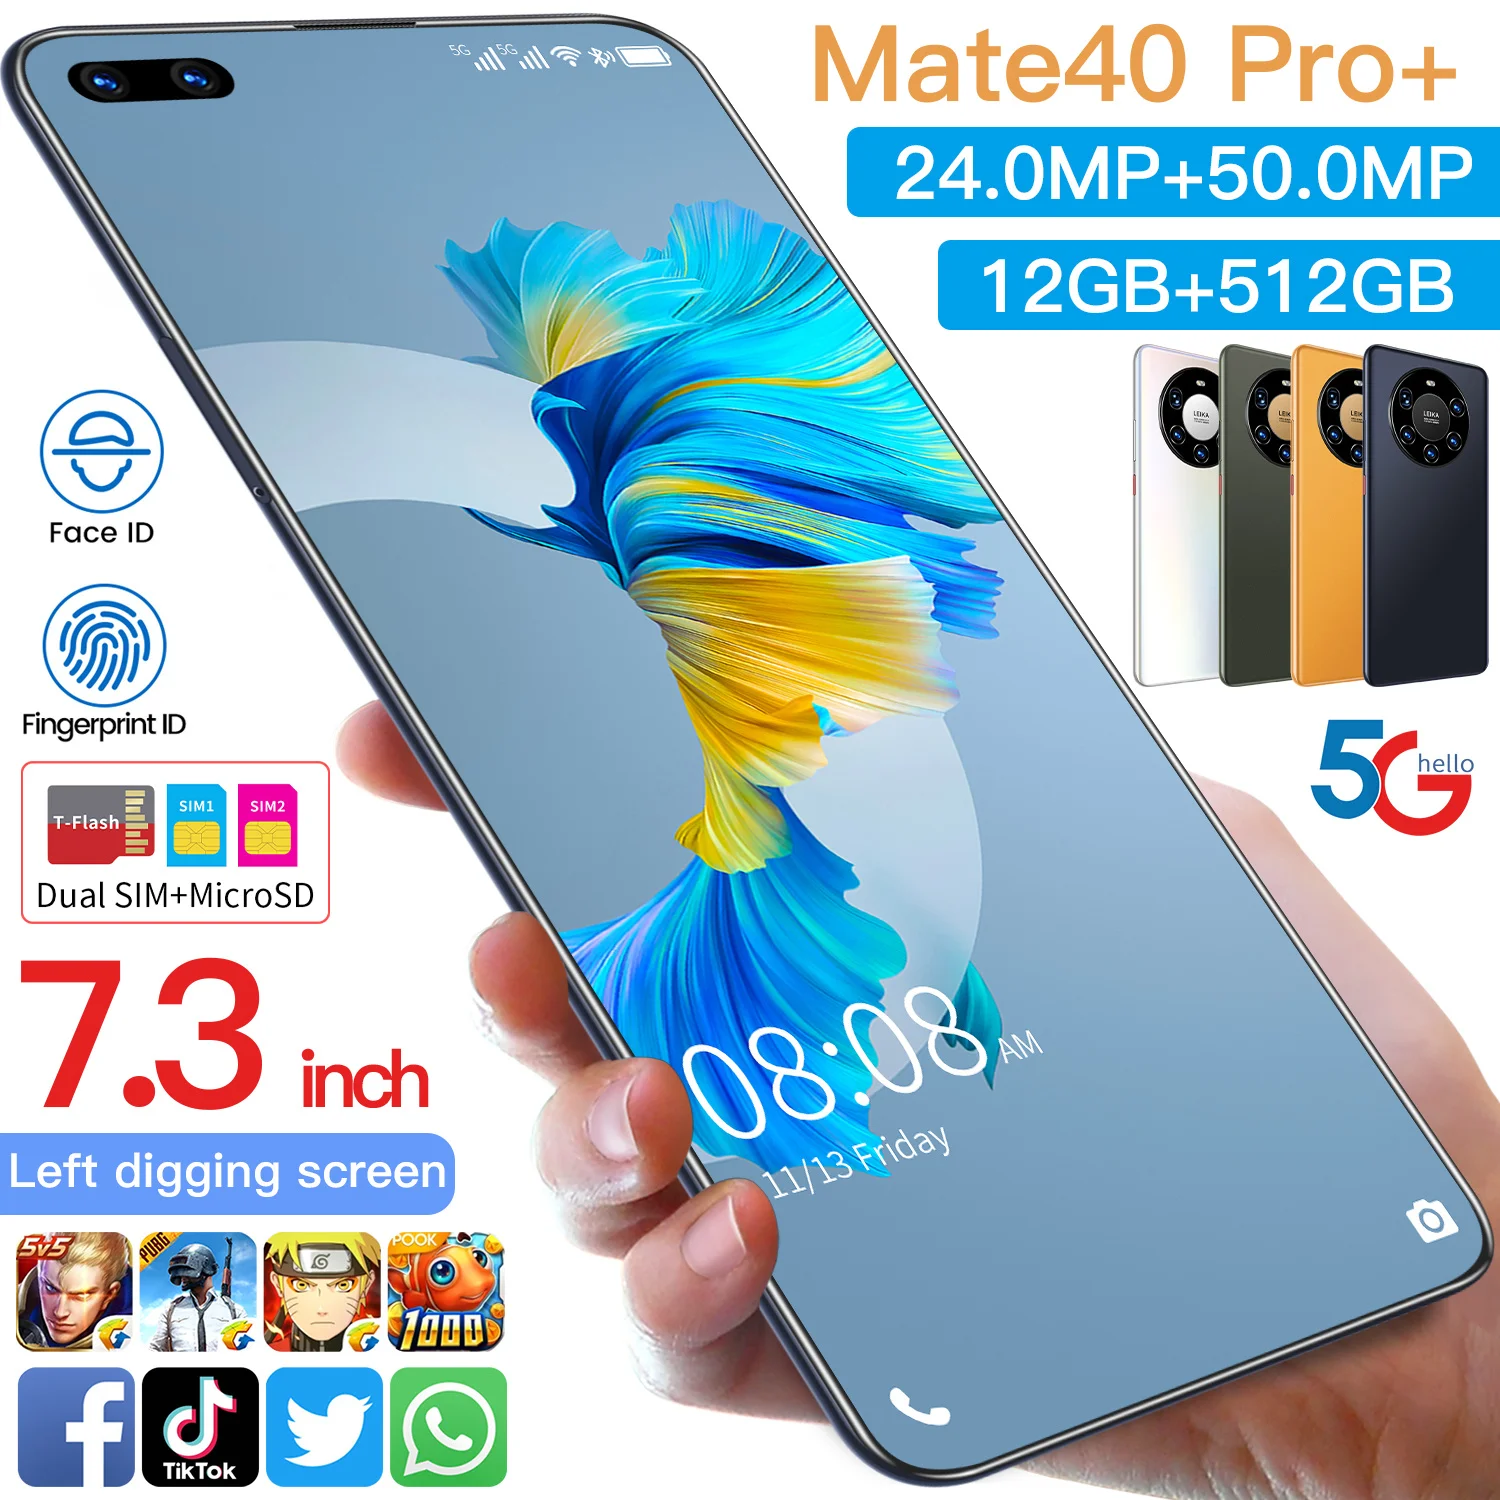 

Hot Selling Mate 40 Pro+ original 12gb+512gb 24MP+50MP face unlock full Display Android 10.0 Cell Phone Smart Mobile Phone, Black yellow gray white